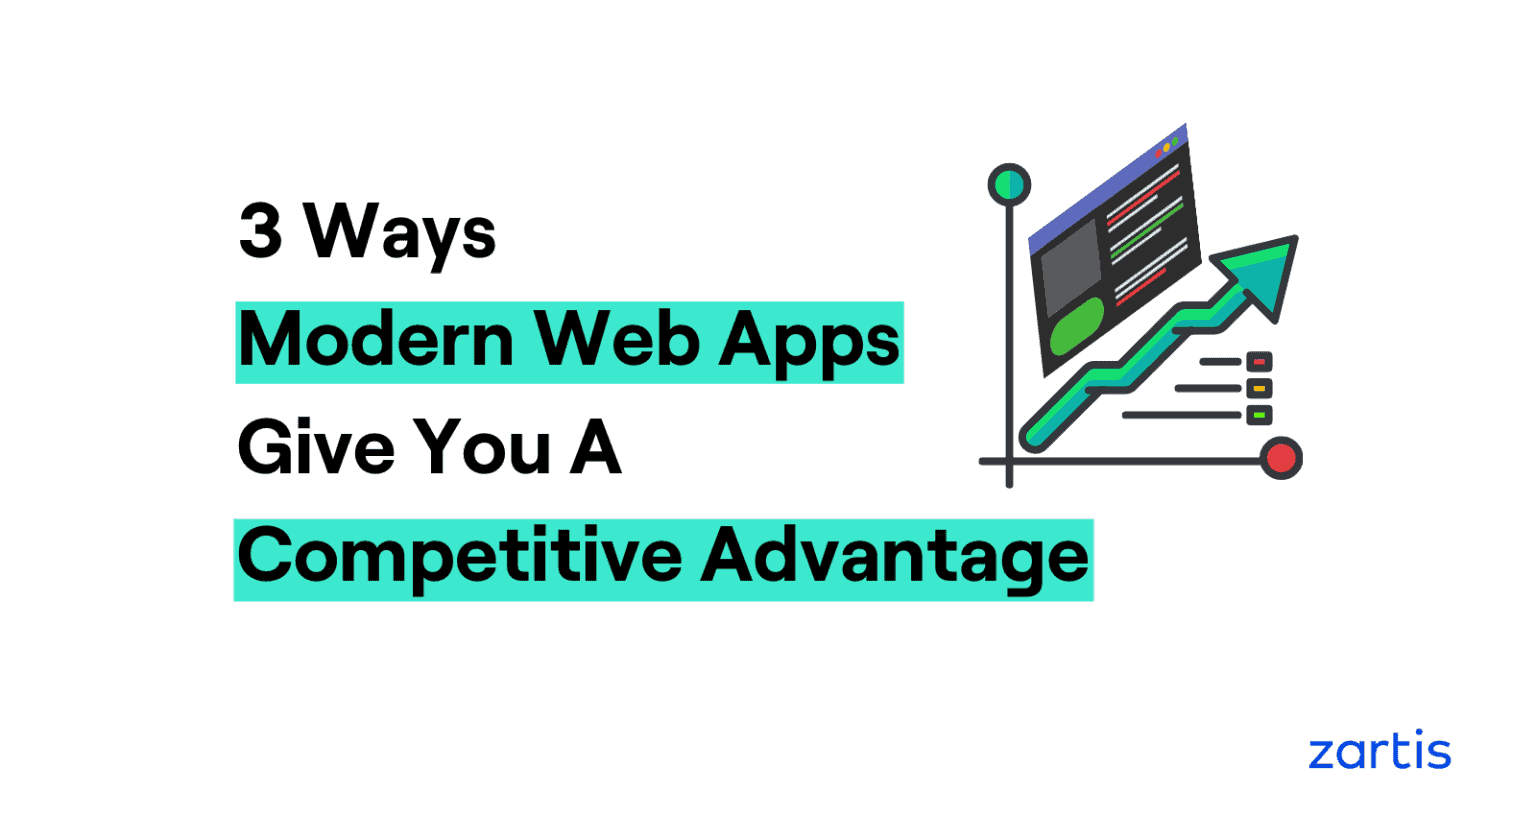 3 Ways Modern Web Apps Give You a Competitive Advantage